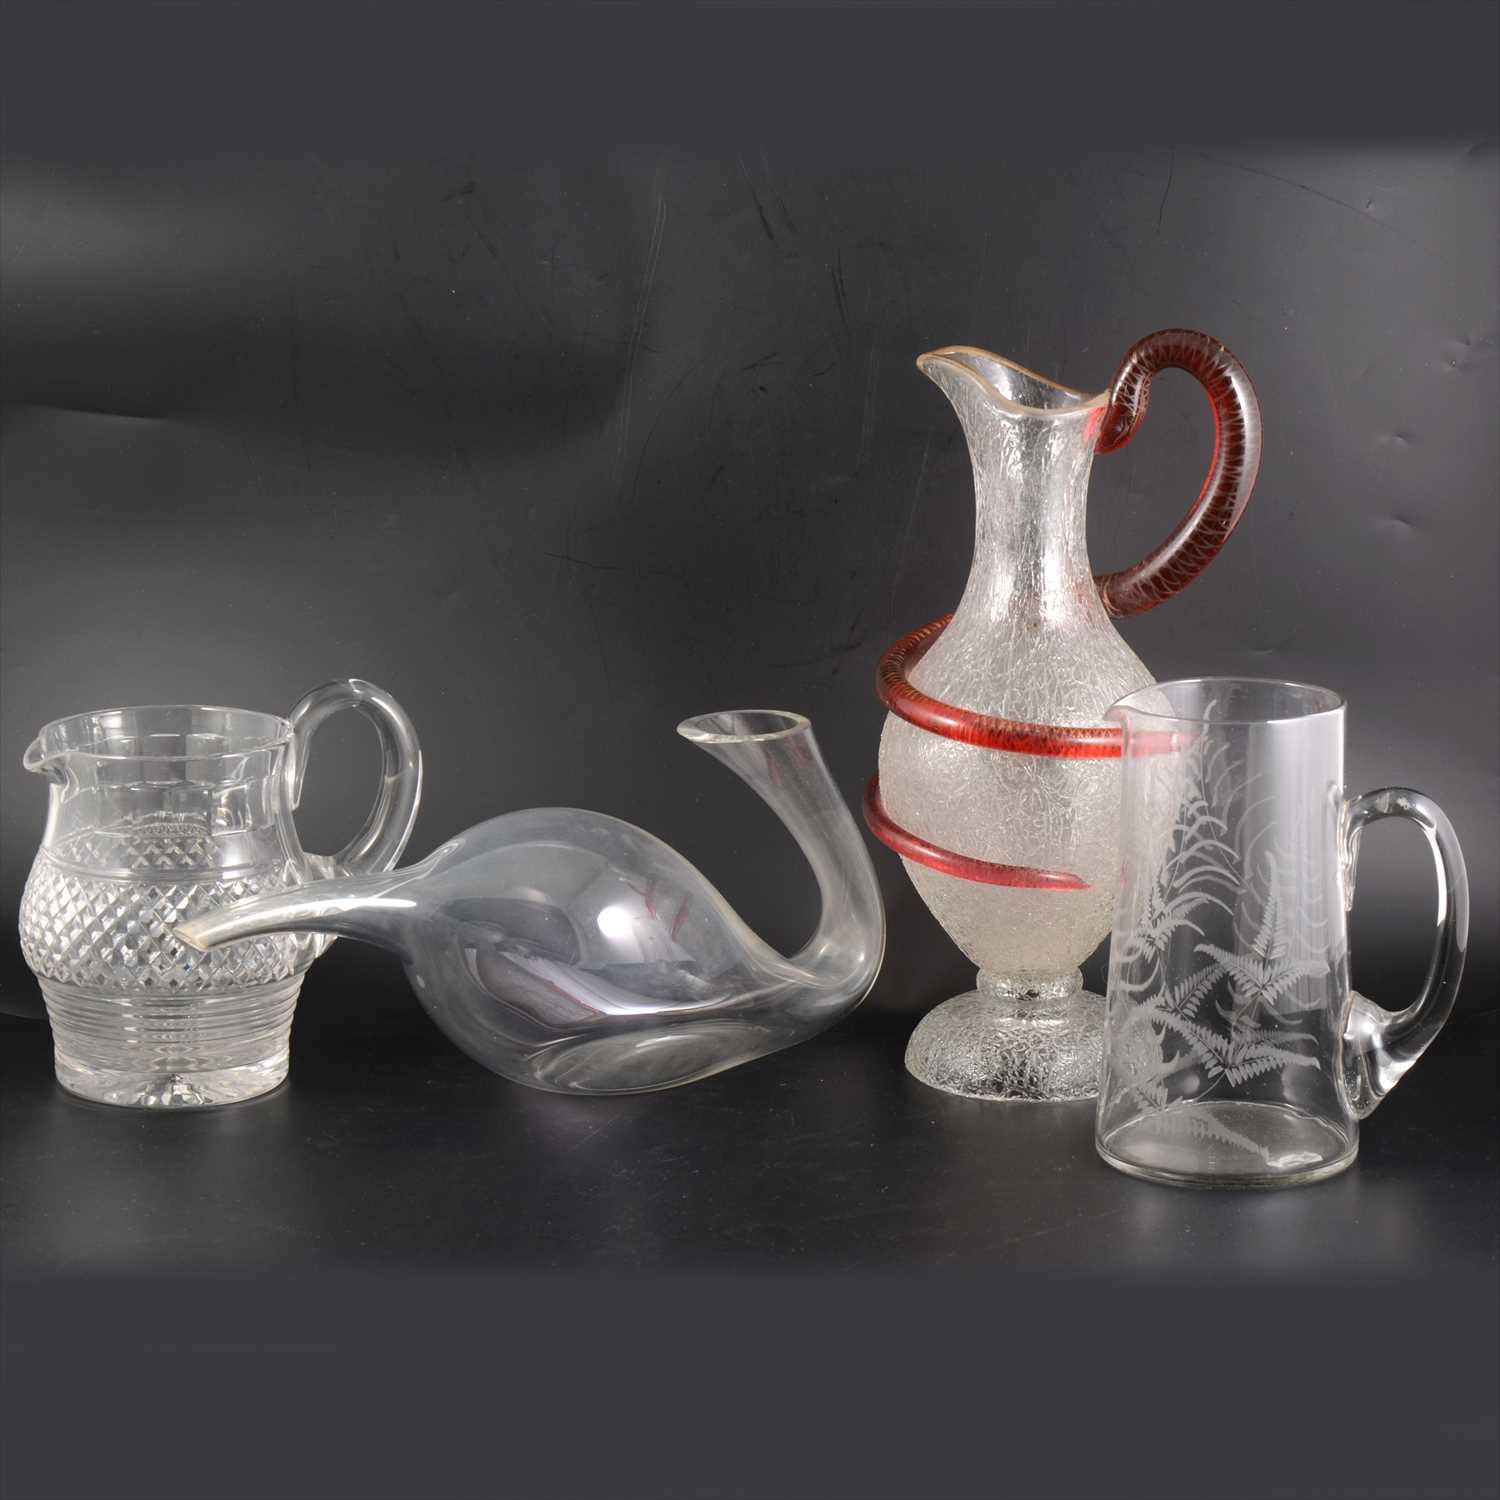 Lot 75 - Frosted glass ewer with coiled serpent handle, collection of glass jugs, decanters etc.